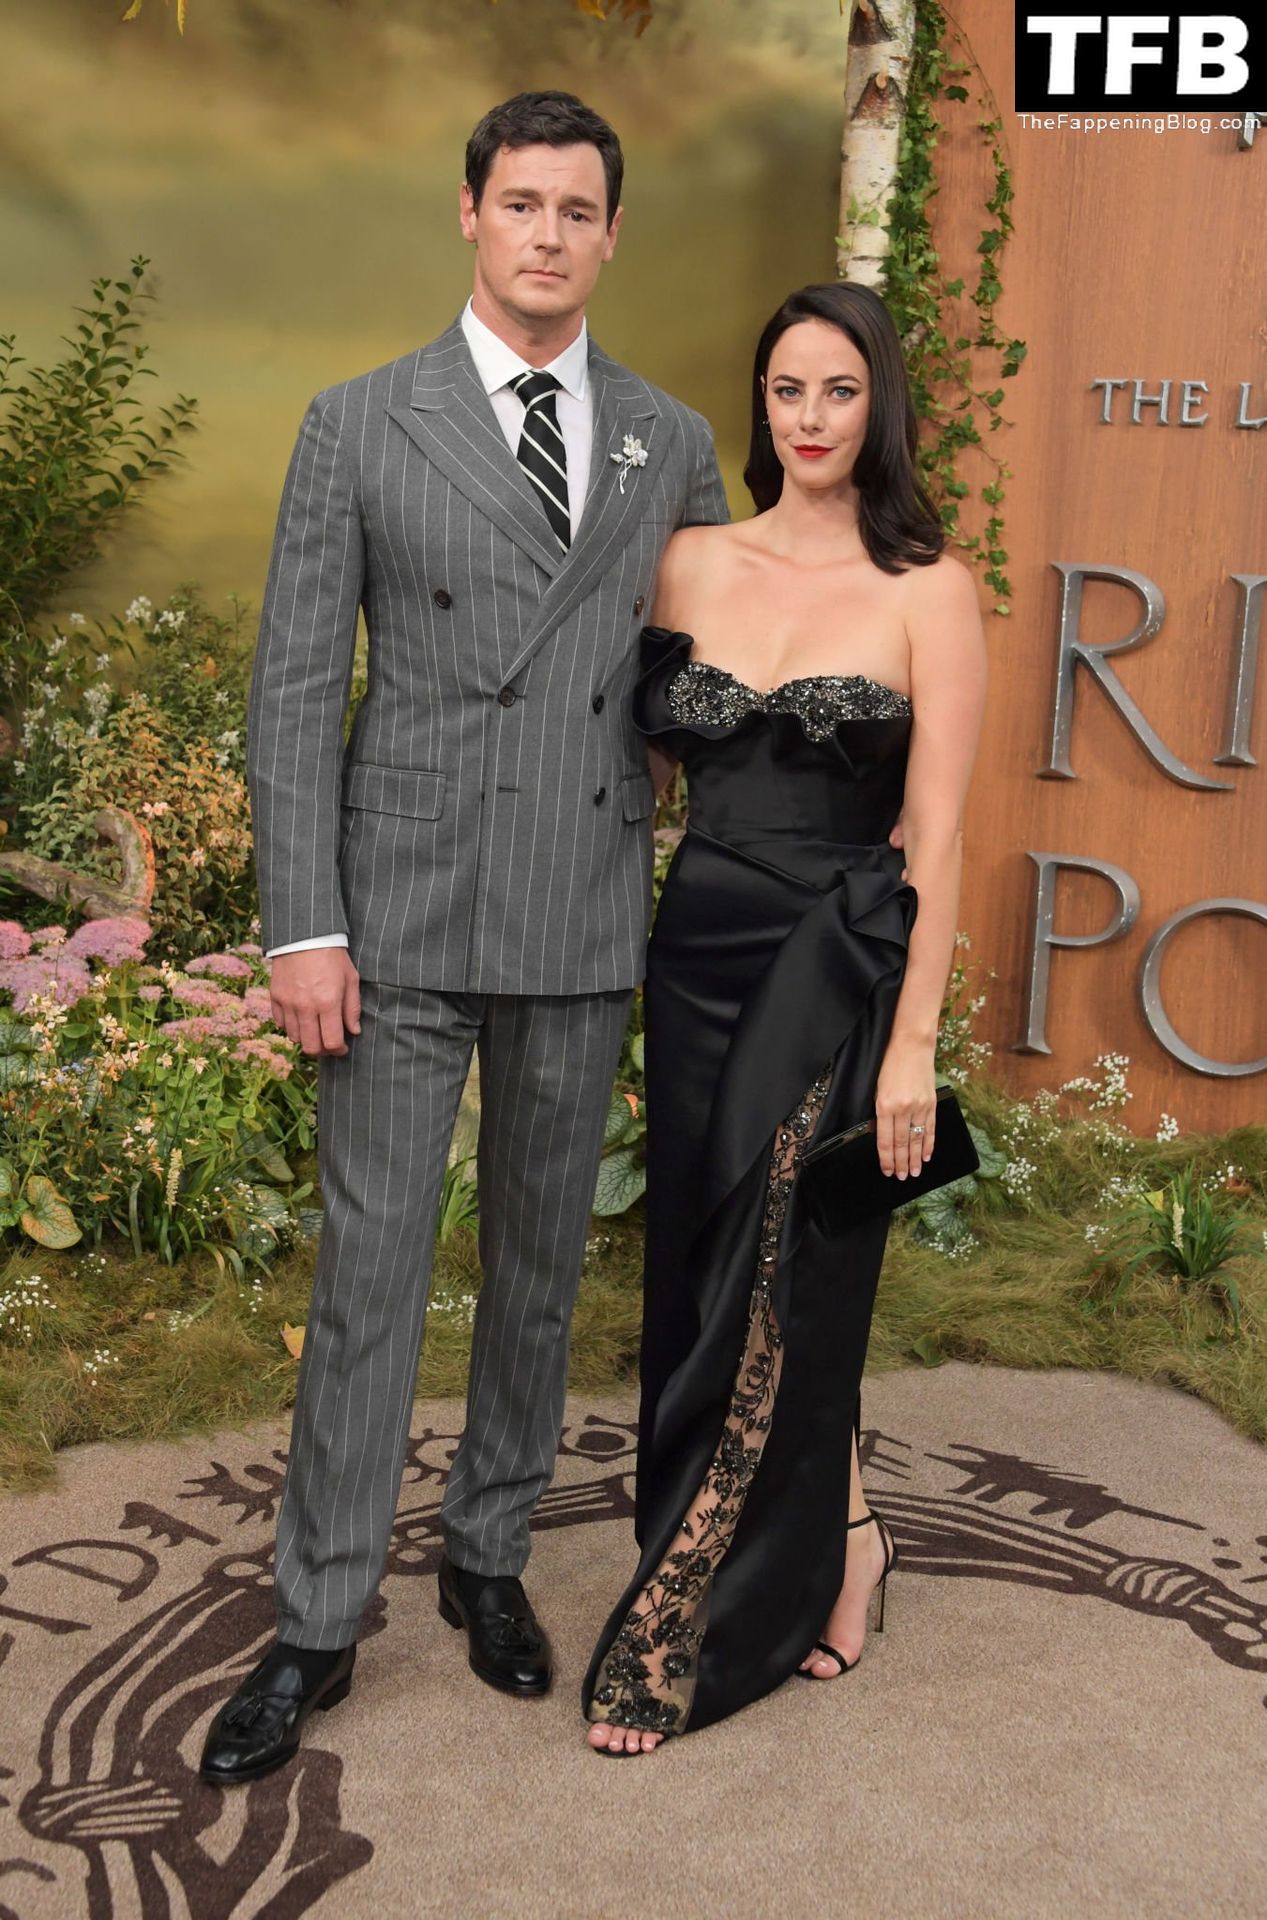 Kaya Scodelario Displays Her Beautiful Figure at the Premiere of “The Lord Of The Rings: The Rings Of Power” (69 Photos)